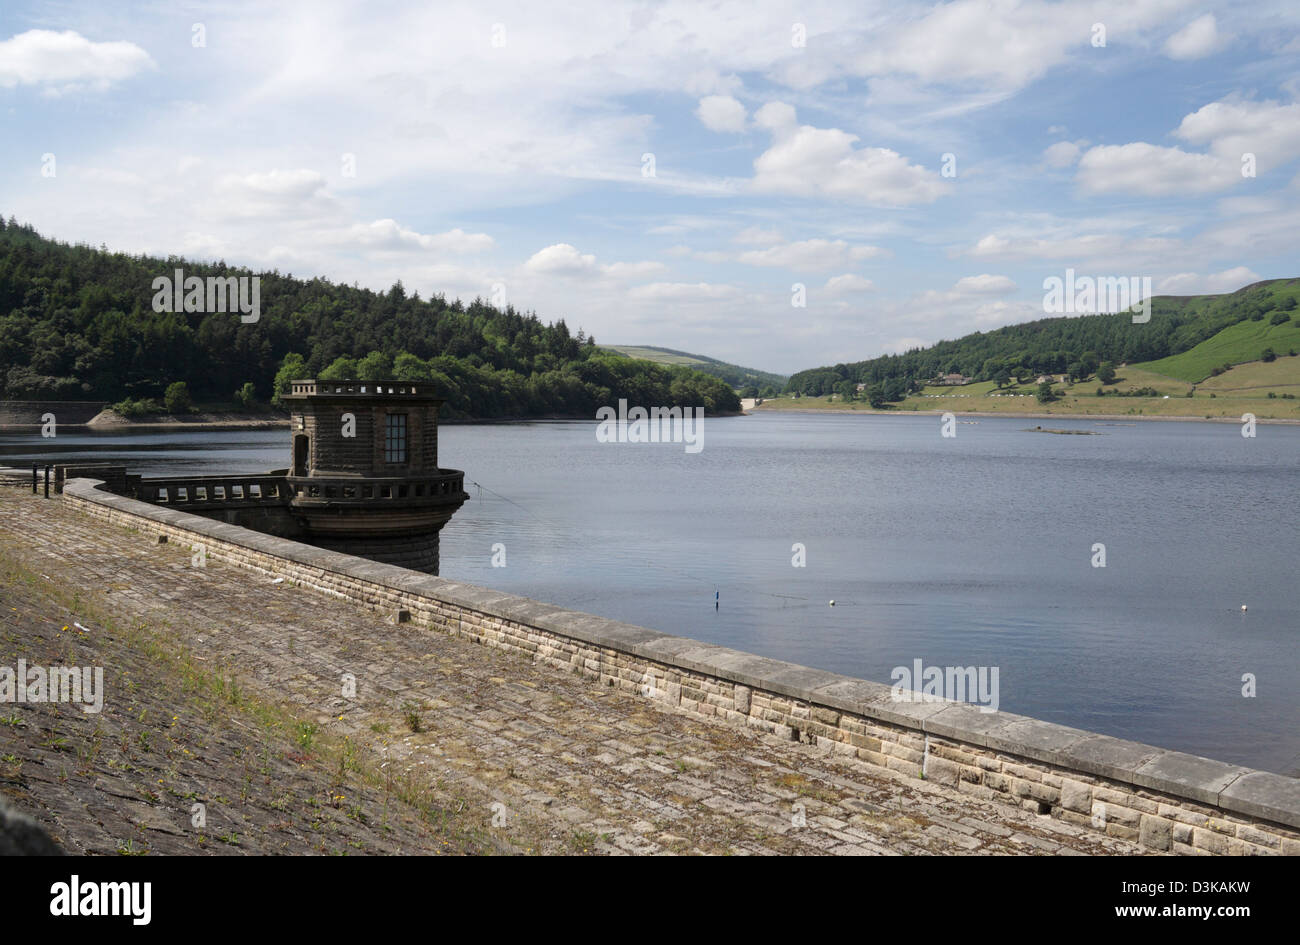 Ladybower Reservoir dam in the Derbyshire Peak District National Park England UK Water supply infrastructure body of water Stock Photo